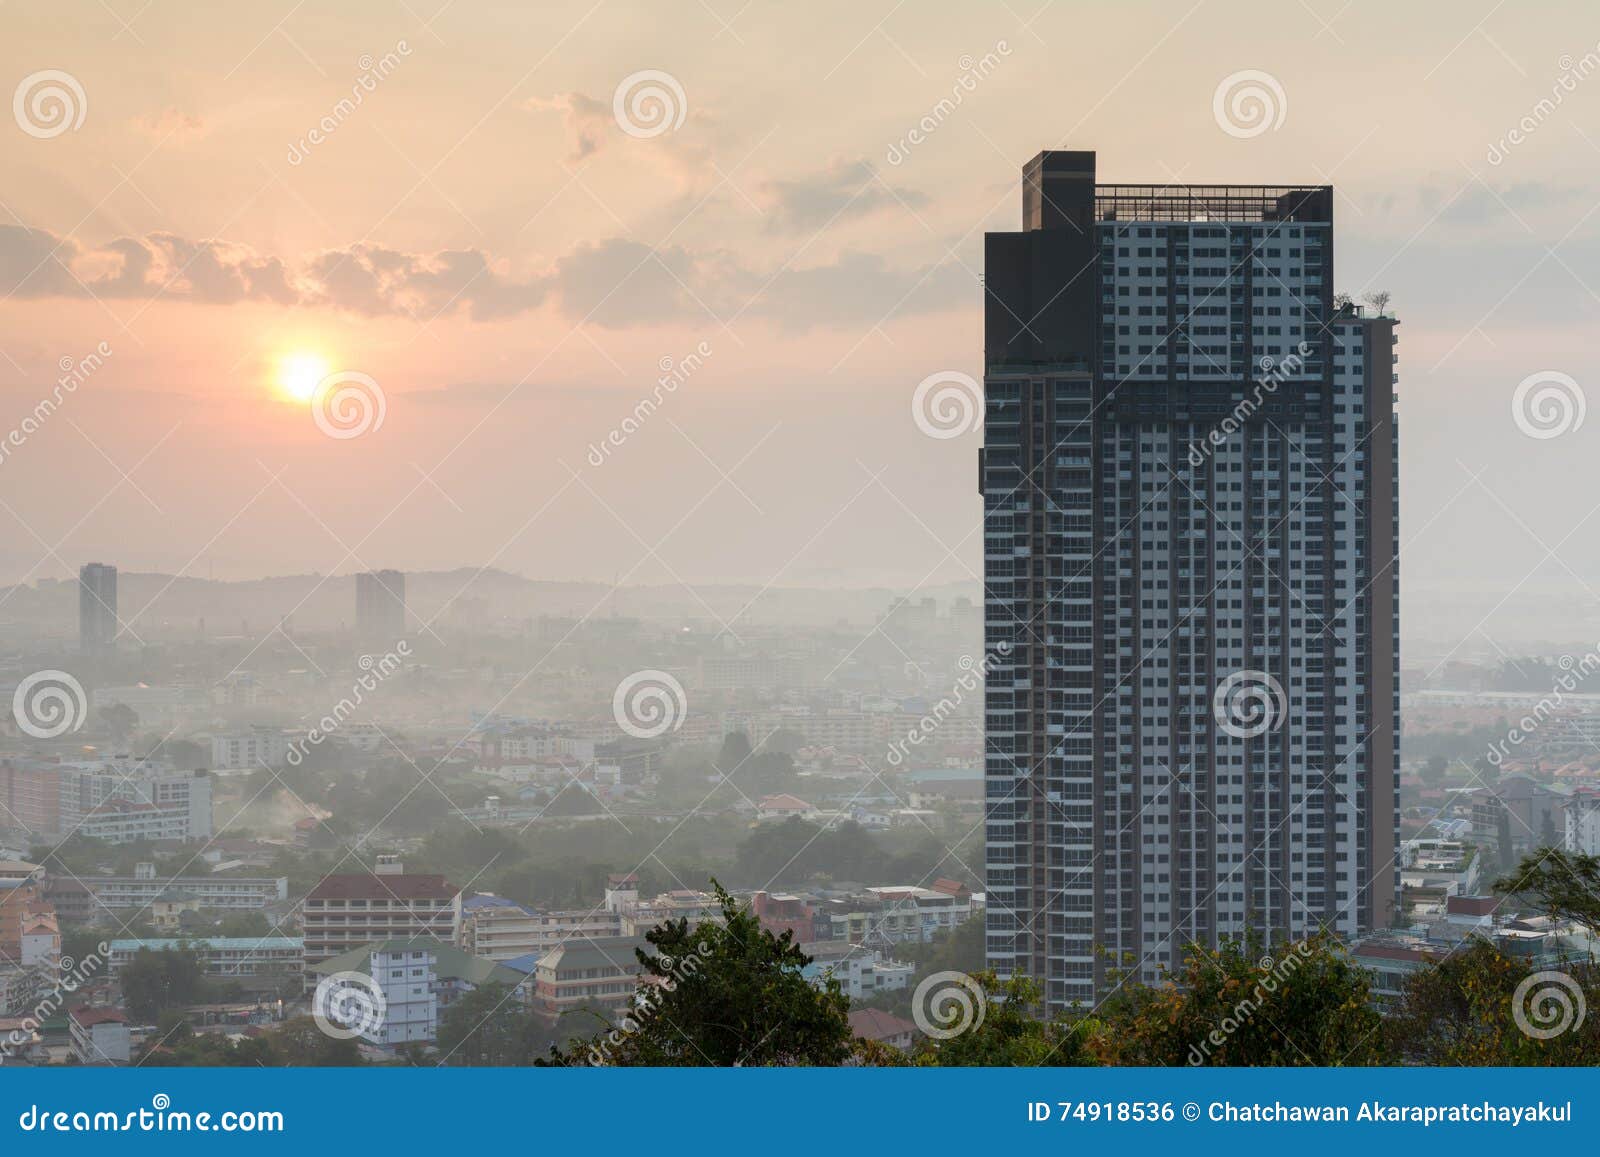 building with beautiful skyscrape during sunrise at pattaya city, thailand